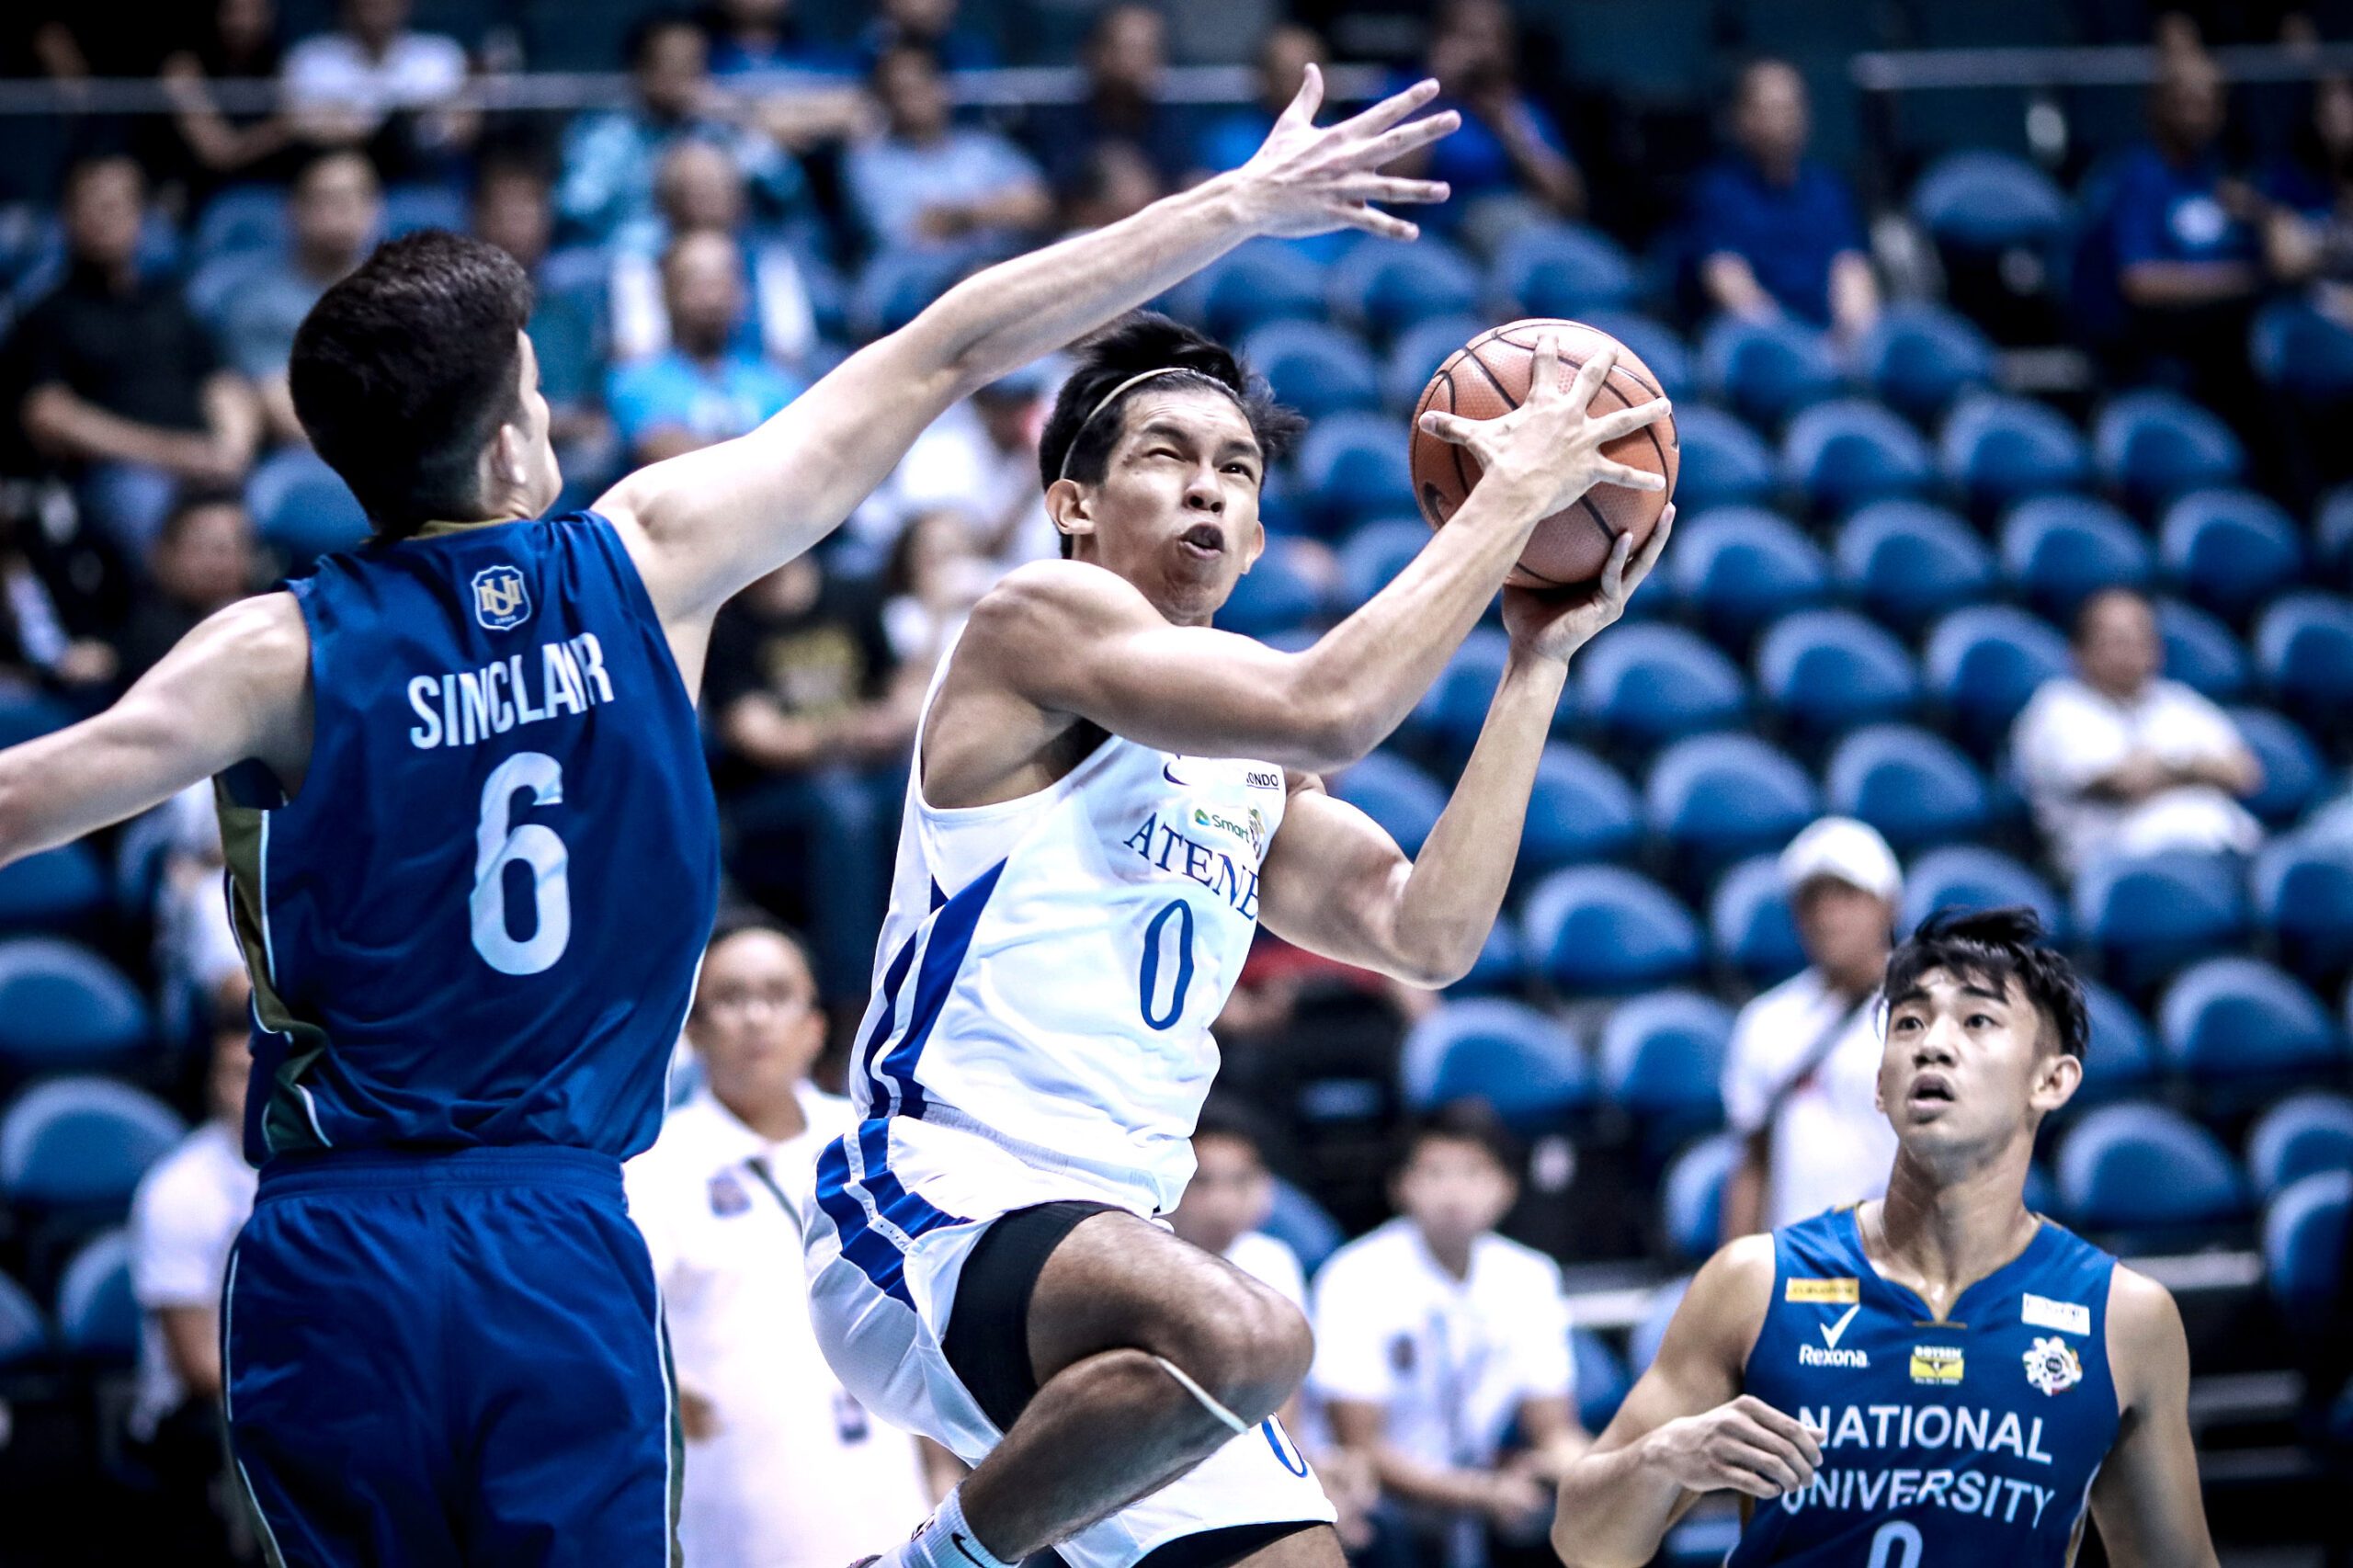 Ateneo clinches Final 4 spot in sweep of NU